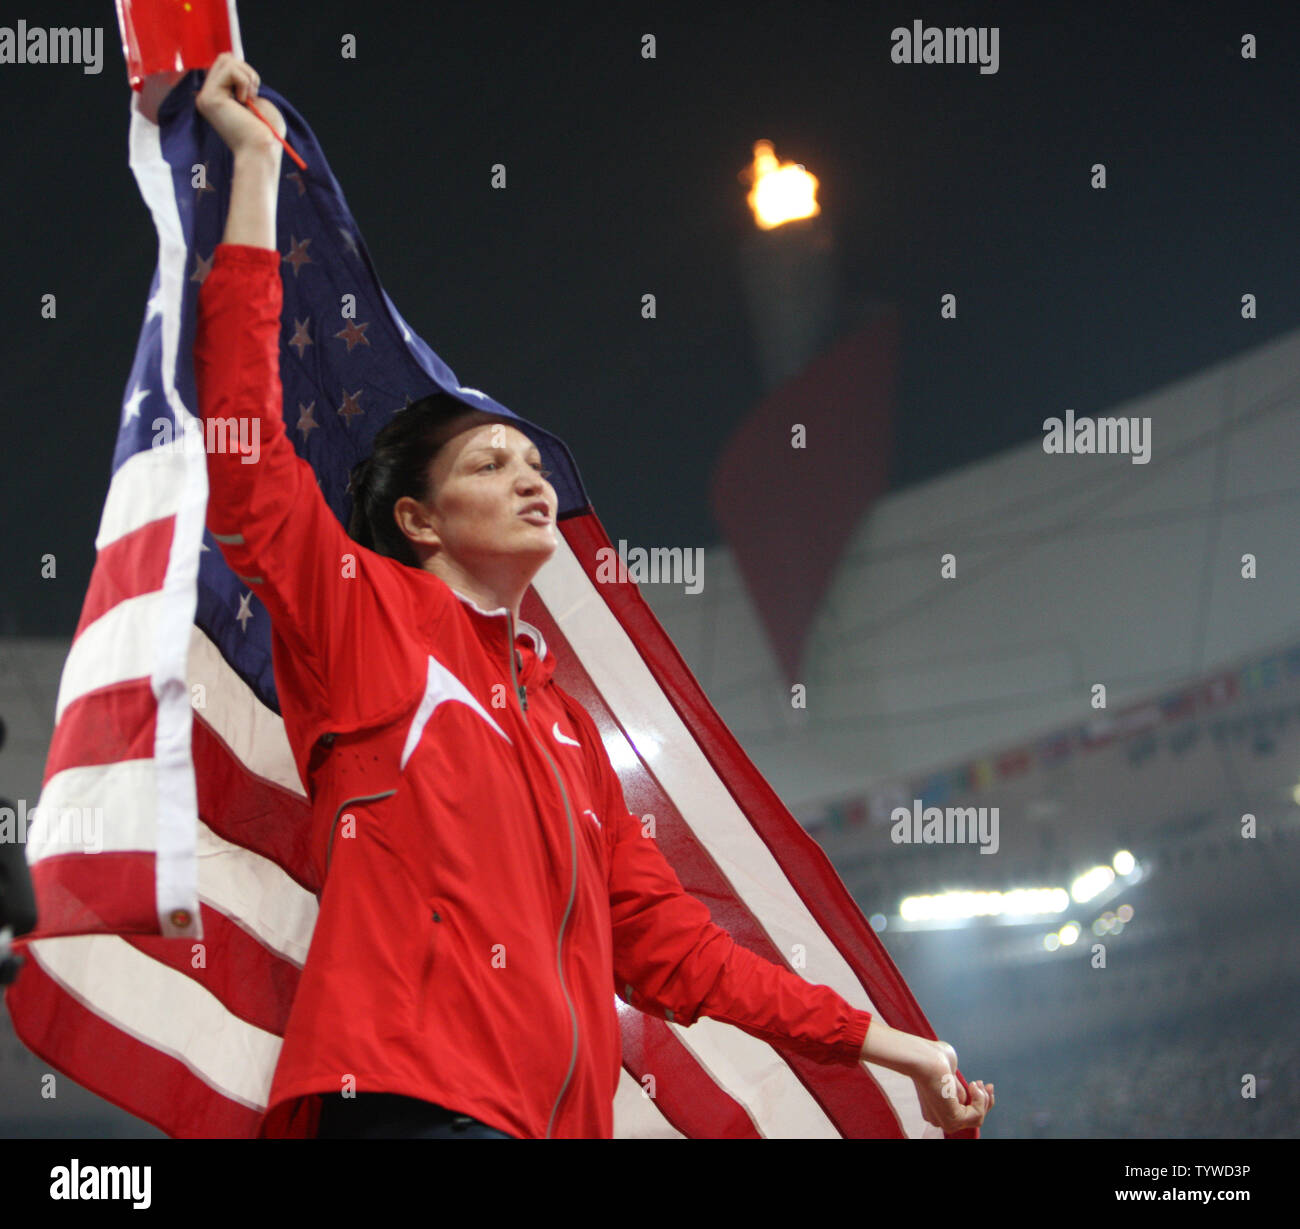 Stephanie Brown Trafton of the U.S. celebrates winning the women's discus throw athletics final at the National Stadium at the Summer Olympics in Beijing on August 18, 2008.  (UPI Photo/Terry Schmitt) Stock Photo